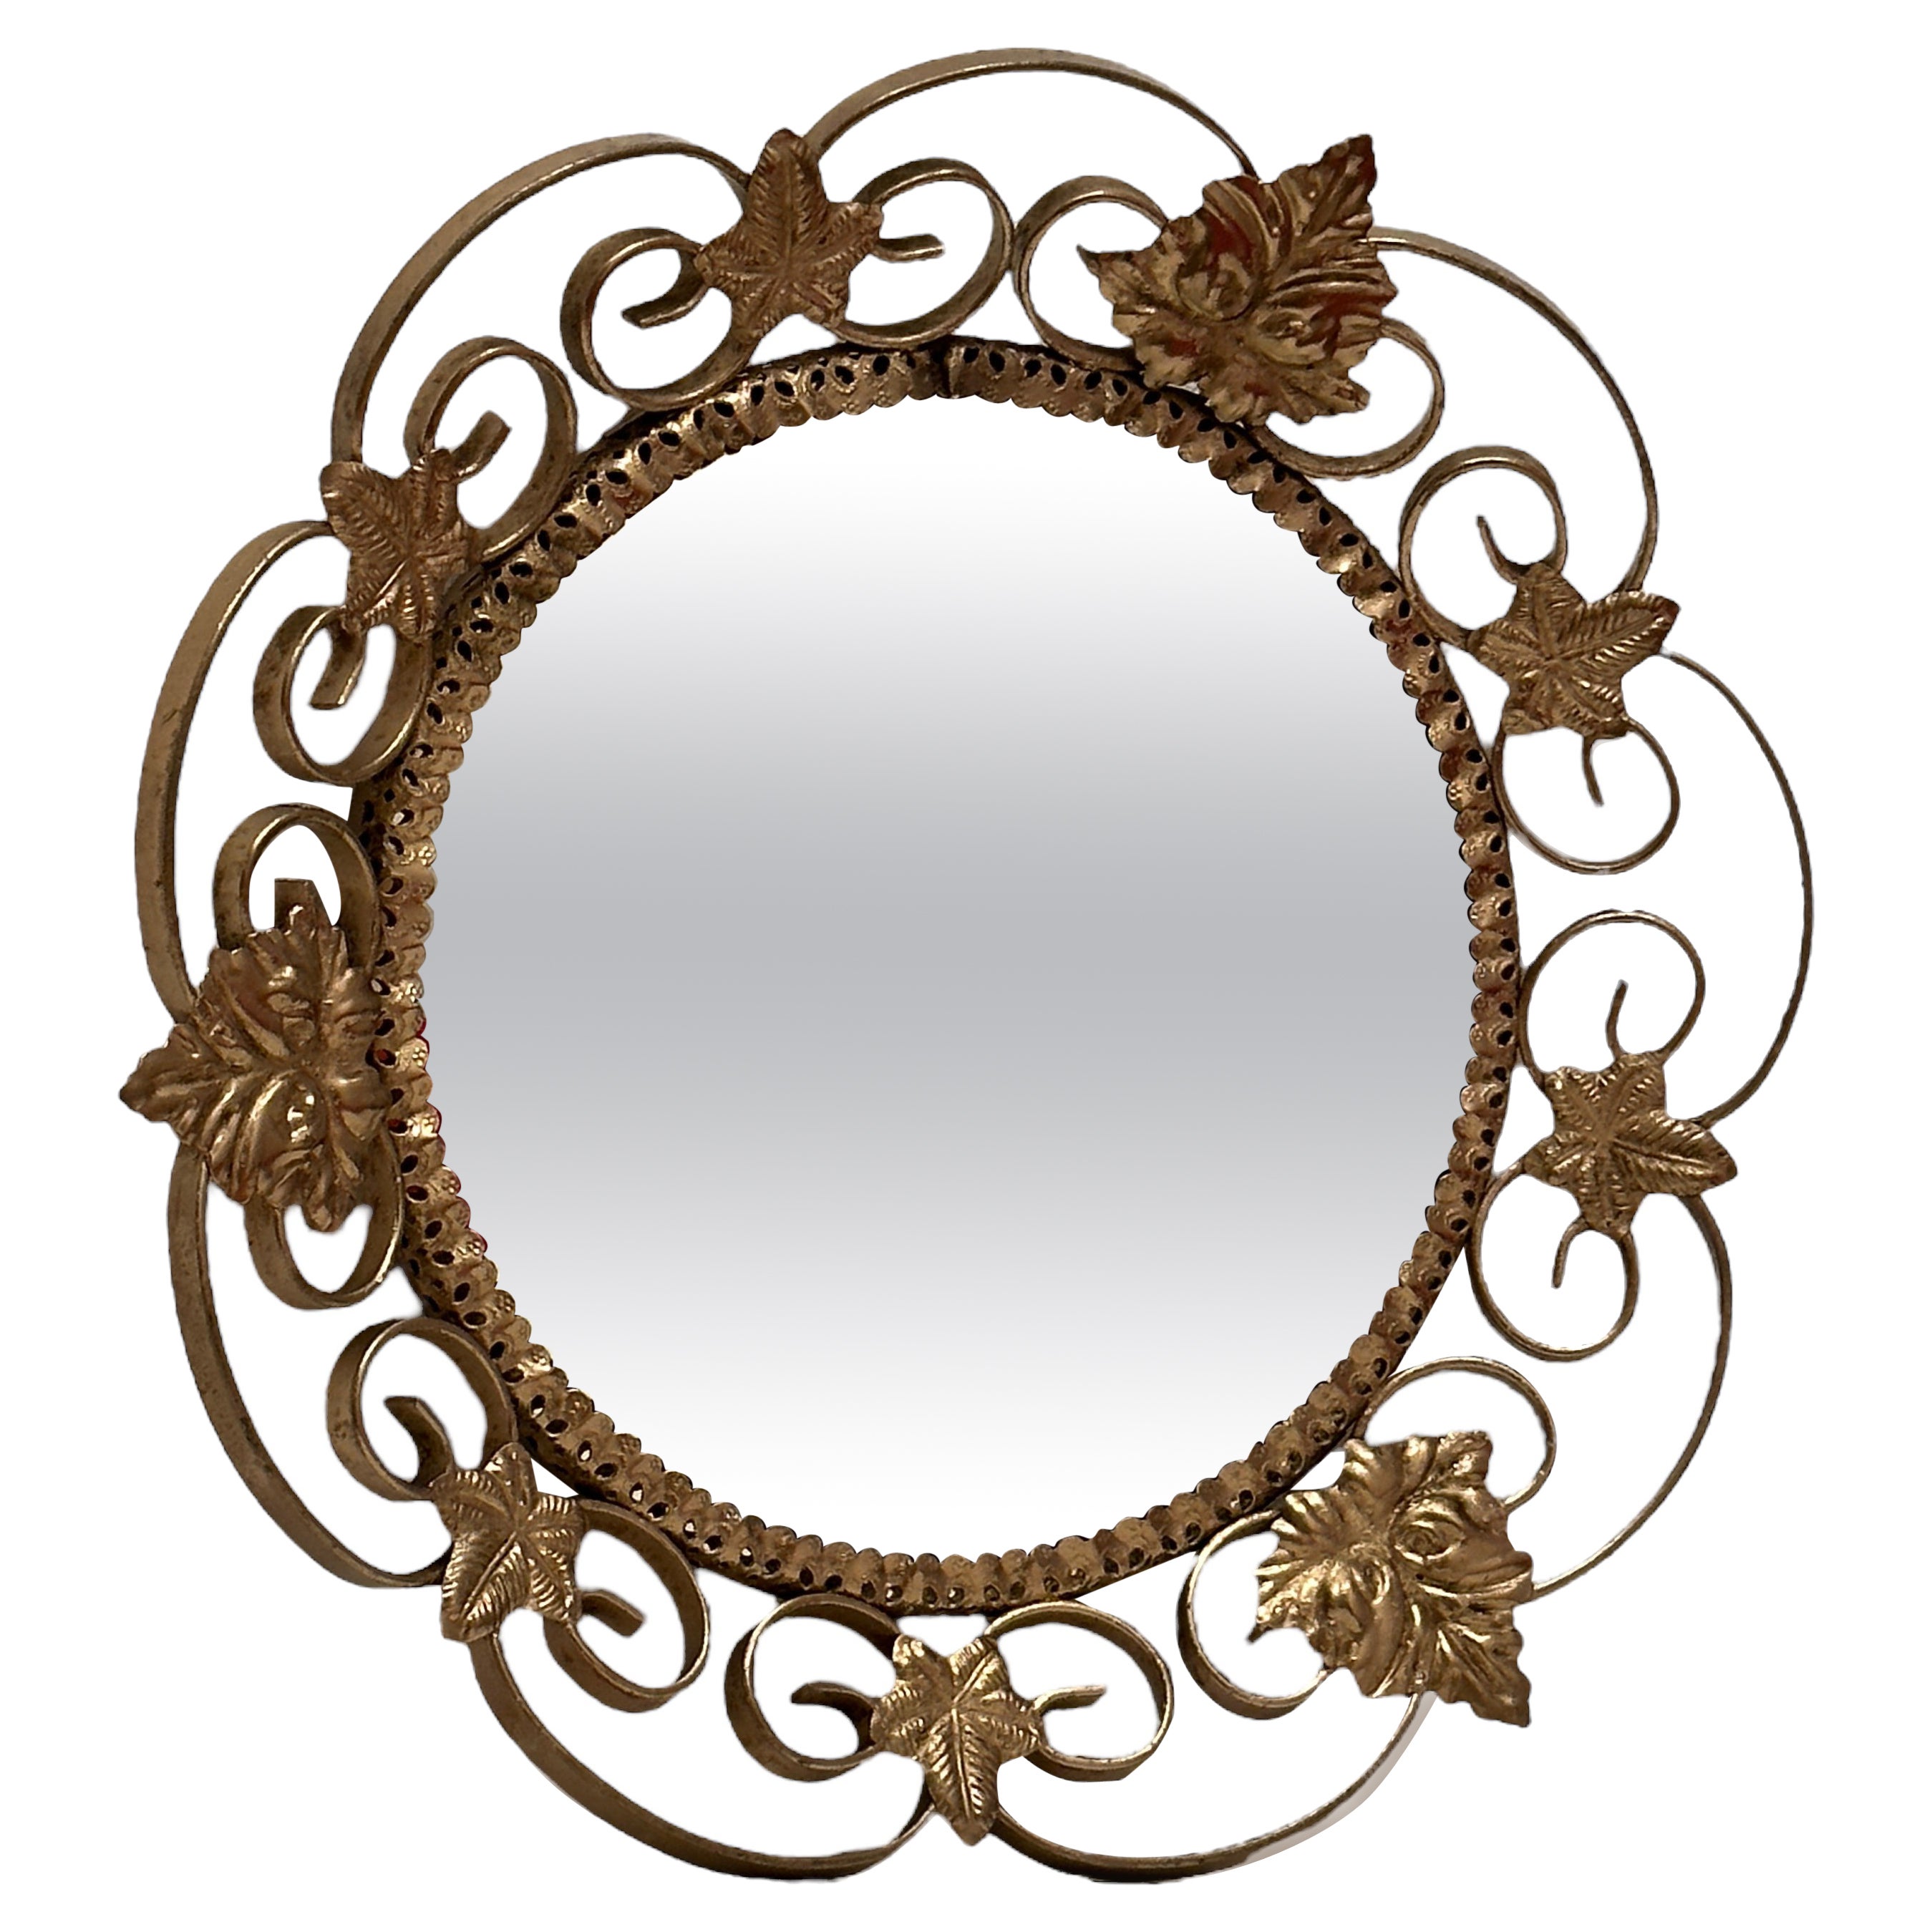 Gilt Vine Leaves Hollywood Regency Convex Wall Mirror, Toleware Tole 1960s Italy For Sale